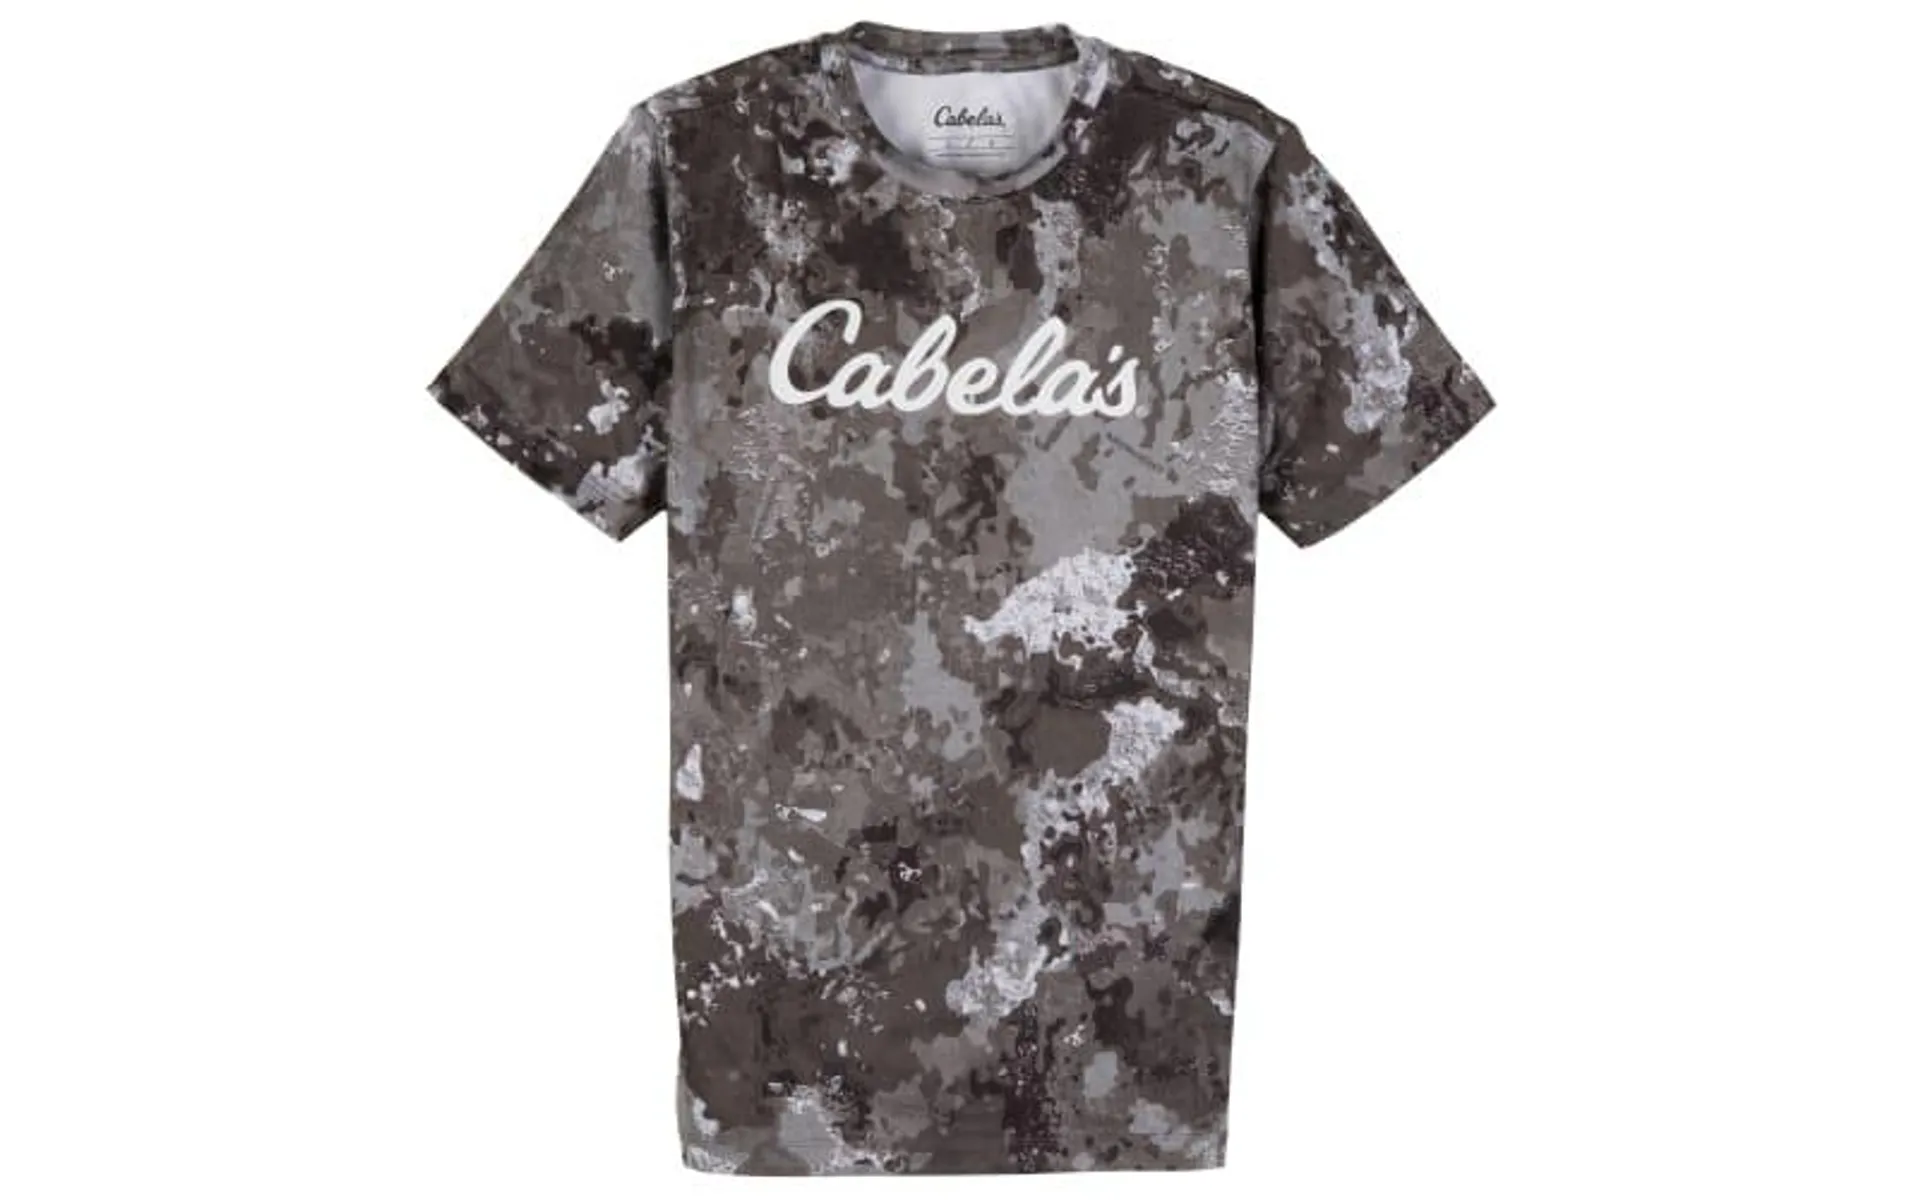 Cabela's Performance Short-Sleeve T-Shirt for Toddlers and Boys